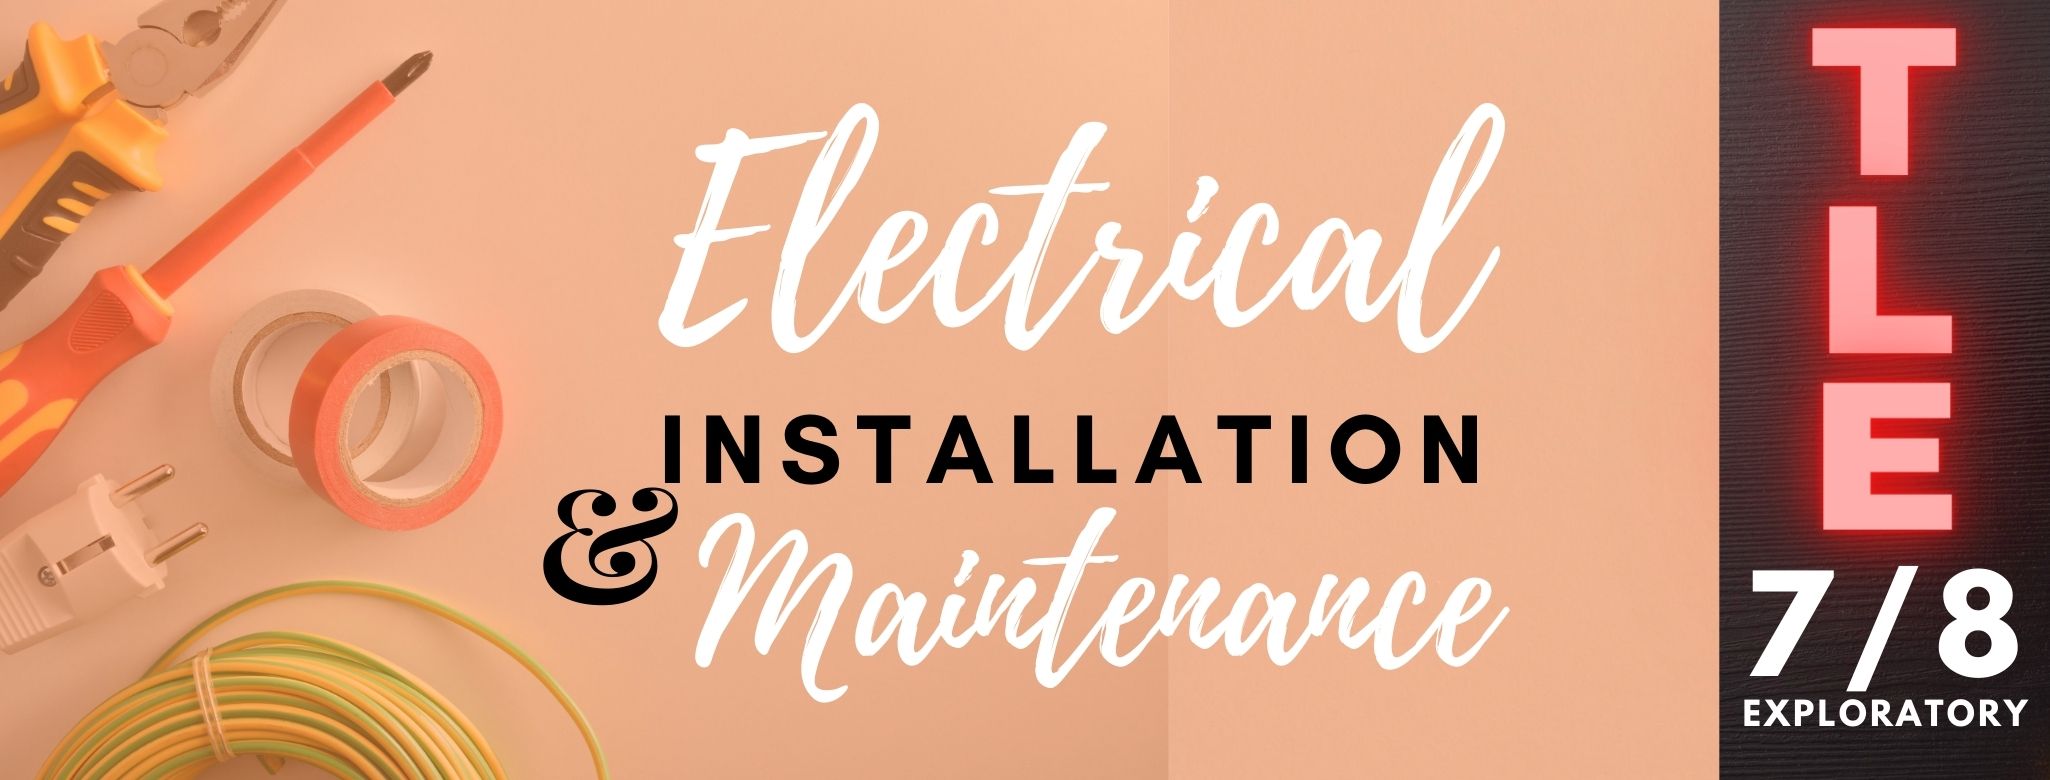 TLE - Electrical Installation and Maintenance copy 1